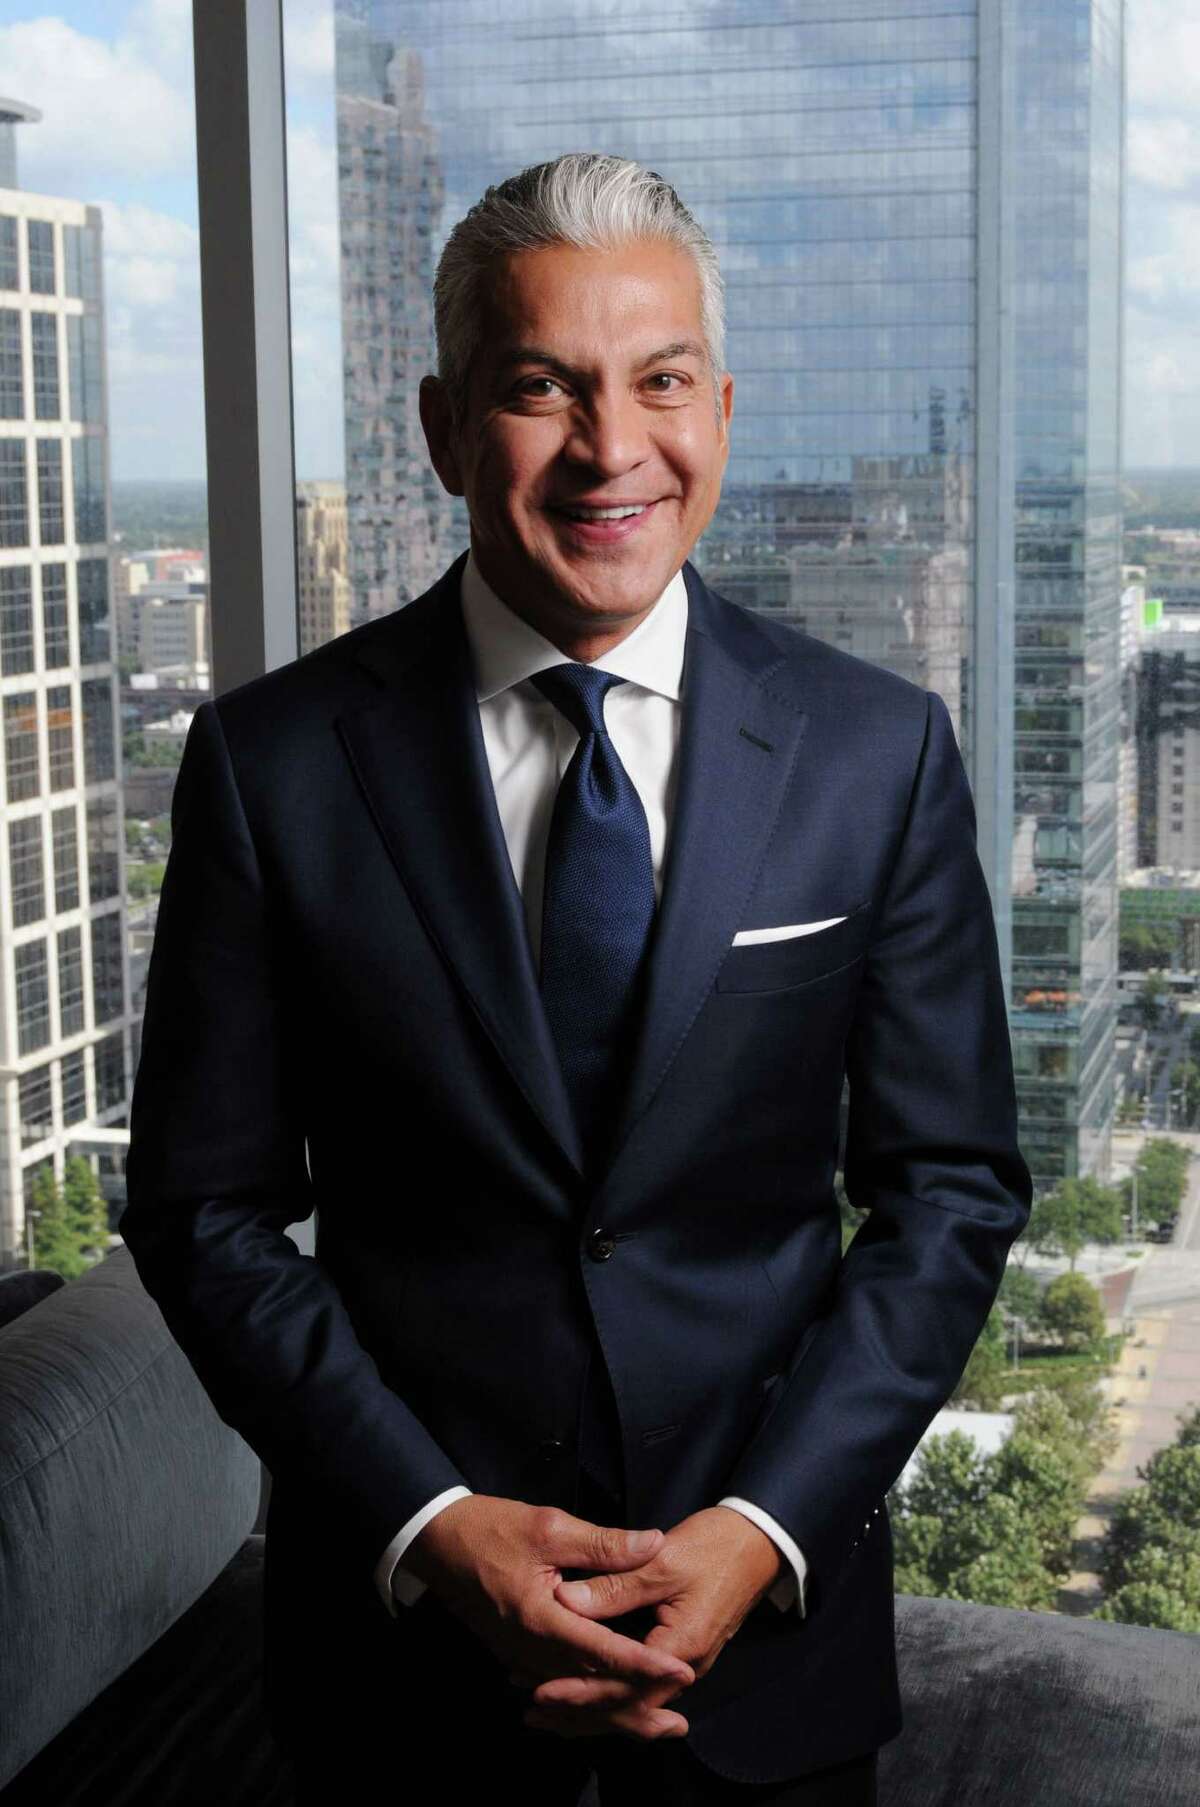 United States Hispanic Chamber of Commerce President and CEO Javier Palomarez at the Hilton Americas Hotel Friday Sept. 18,2015.(Dave Rossman photo)